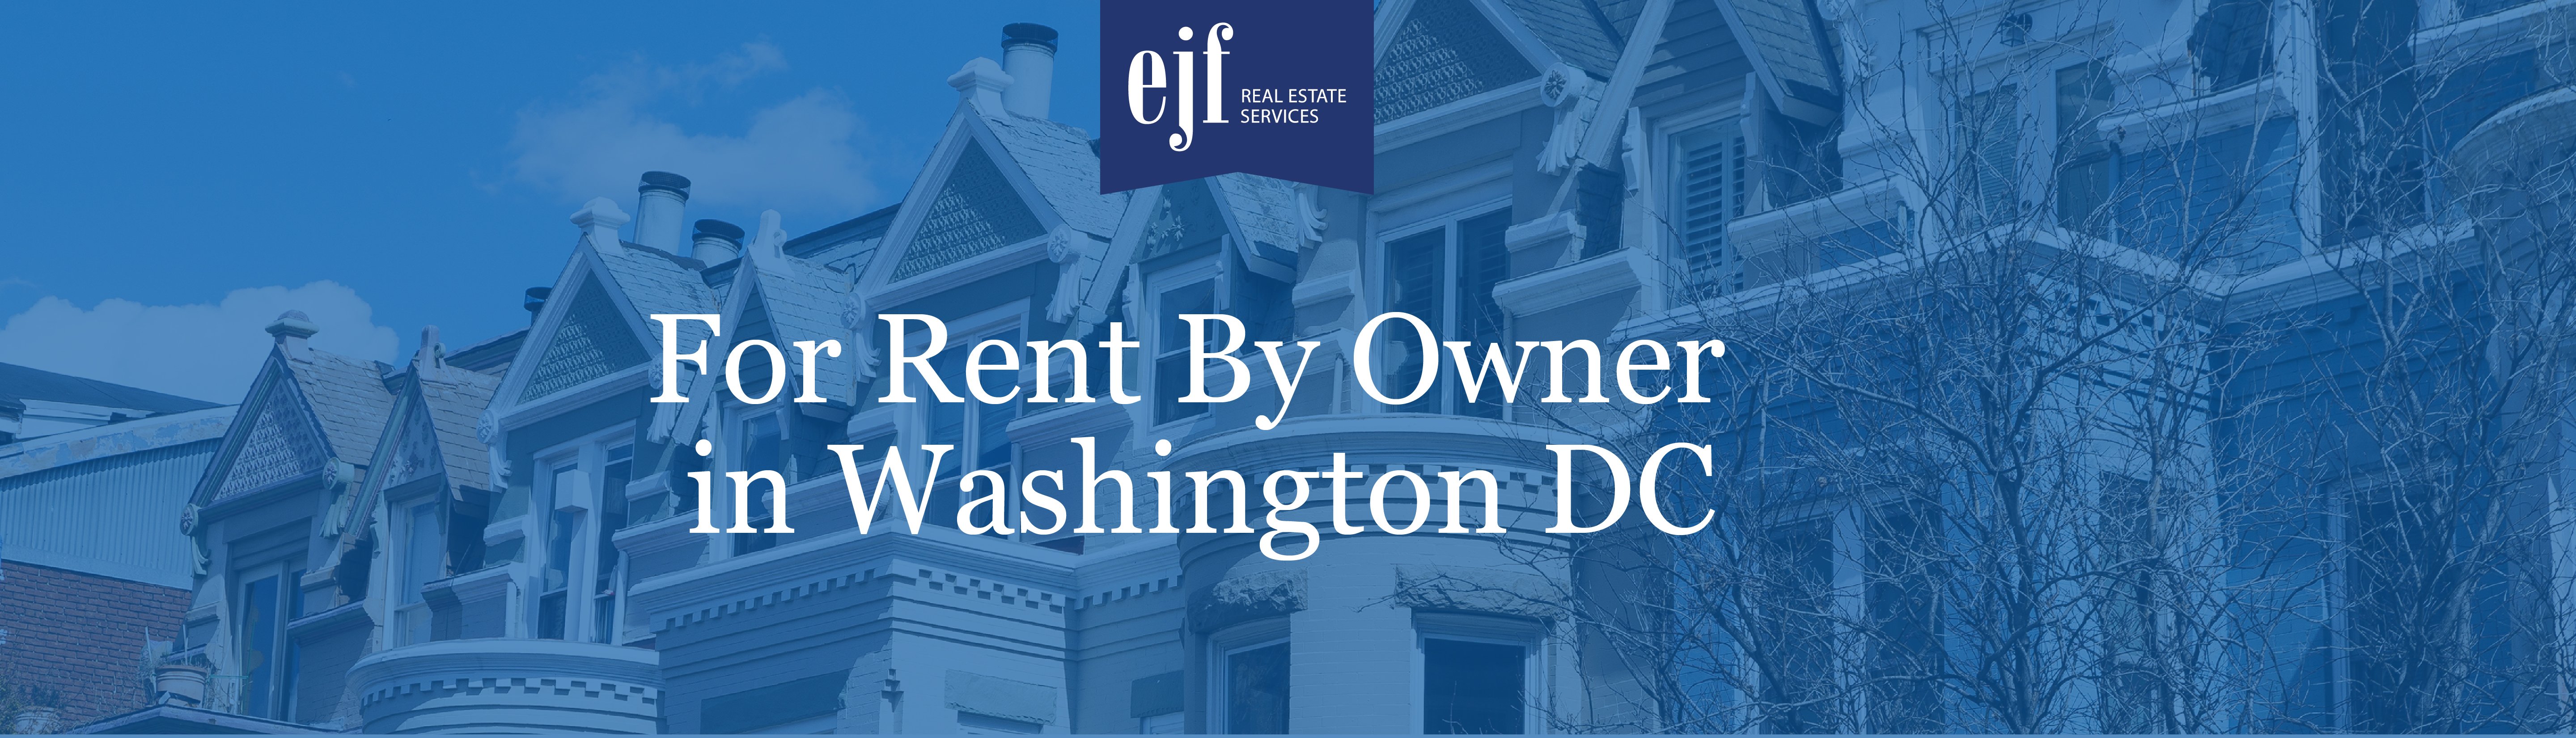 For Rent By Owner in Washington DC